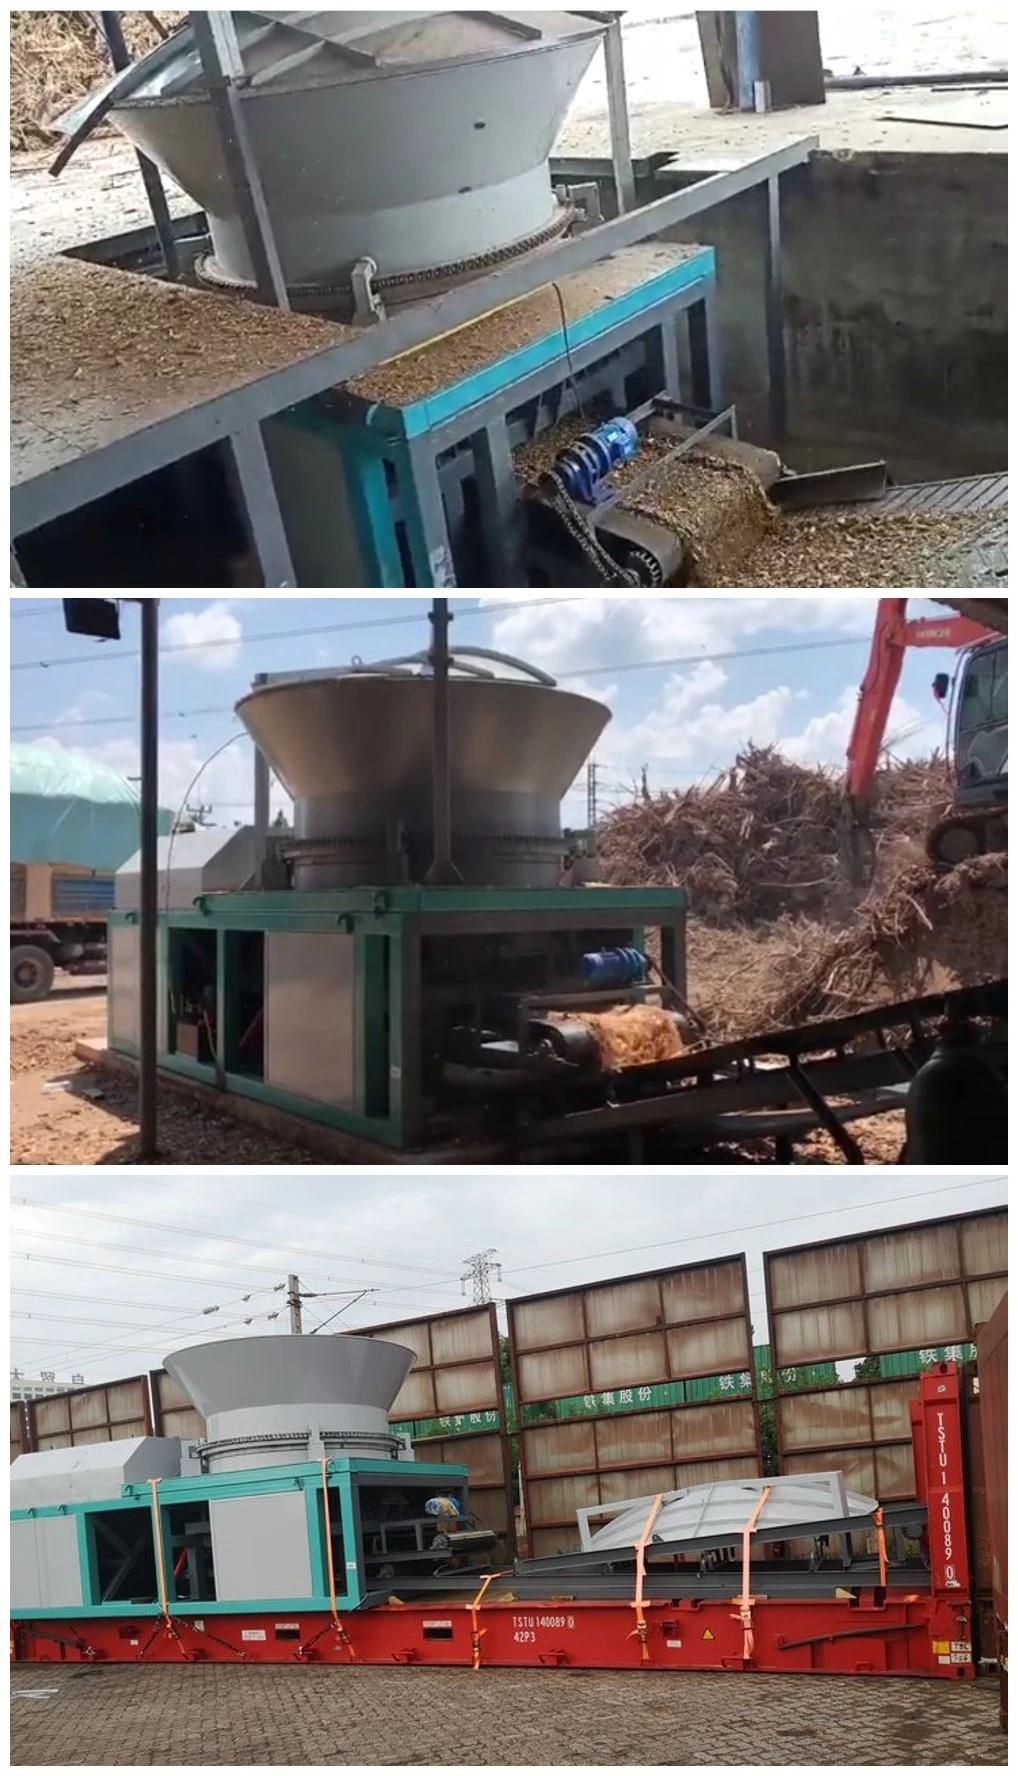 Shd Strong Structure Convenient Operation High Efficiency 10-15t/H Hammer Mill Wood Crusher Machine